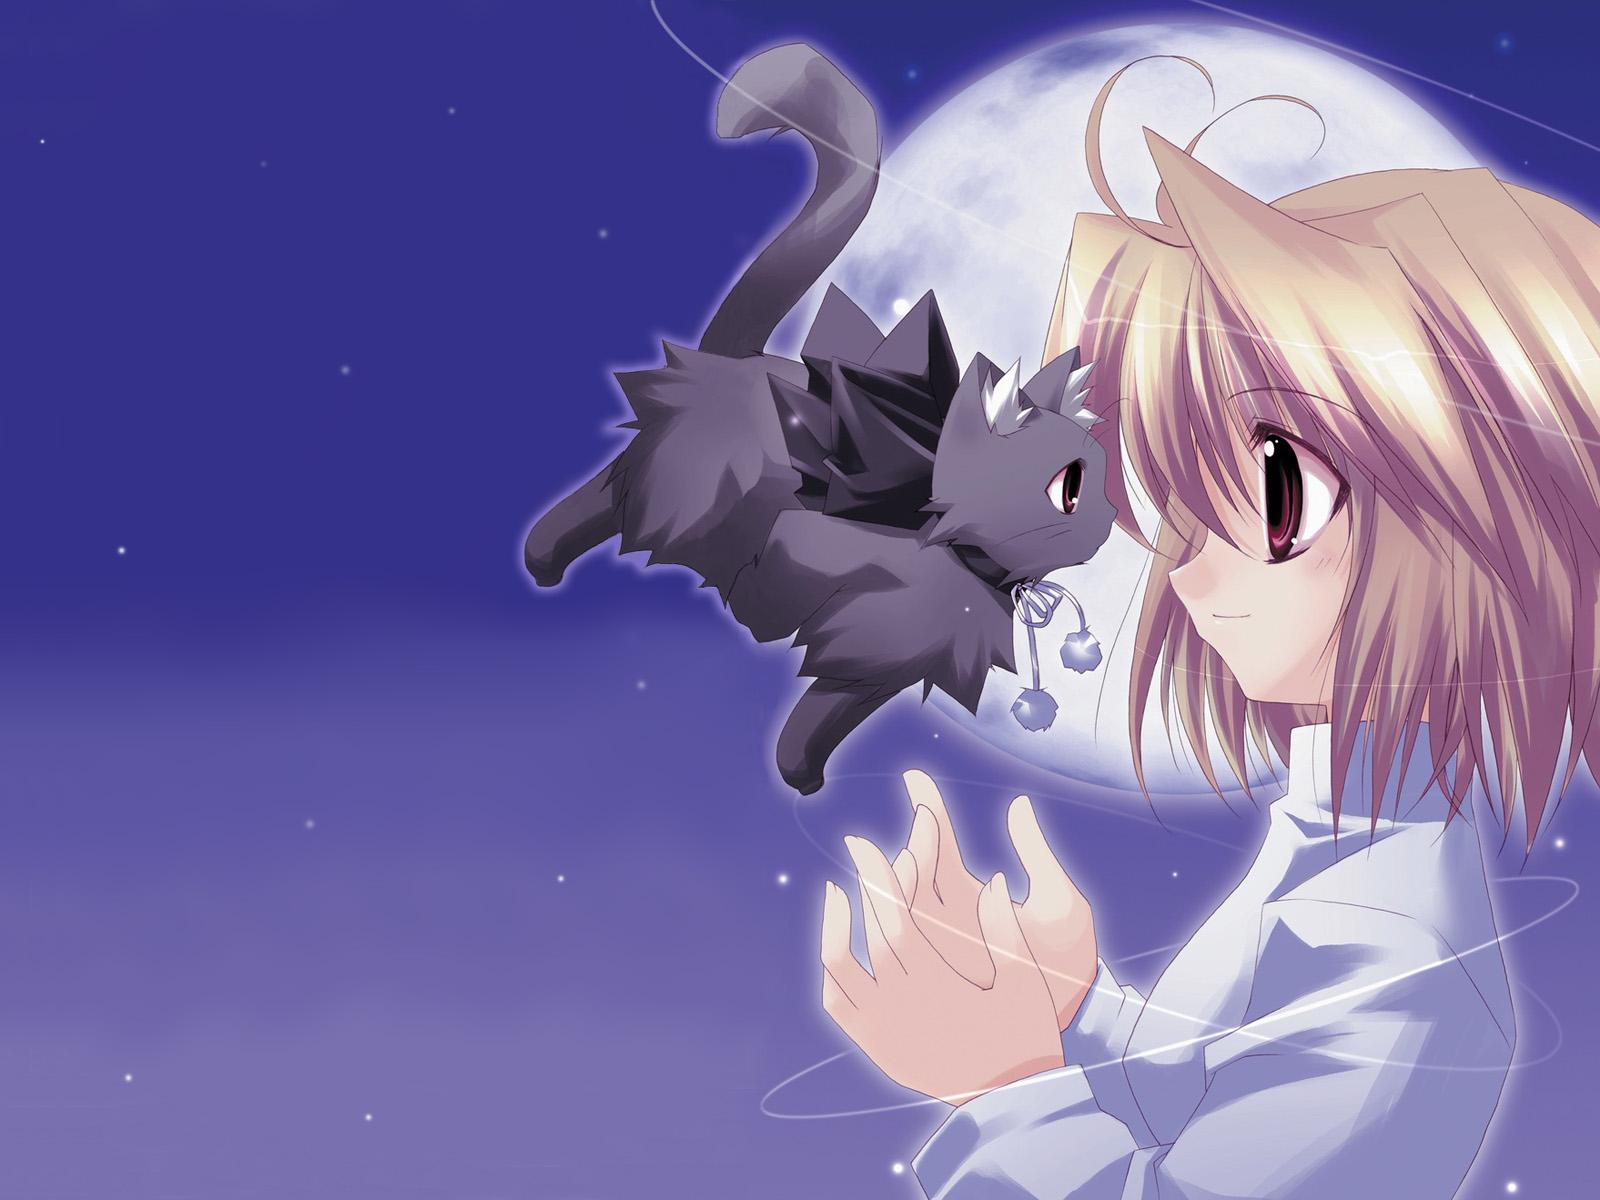 Cute Anime Girl with Fairy Cat Wallpaper